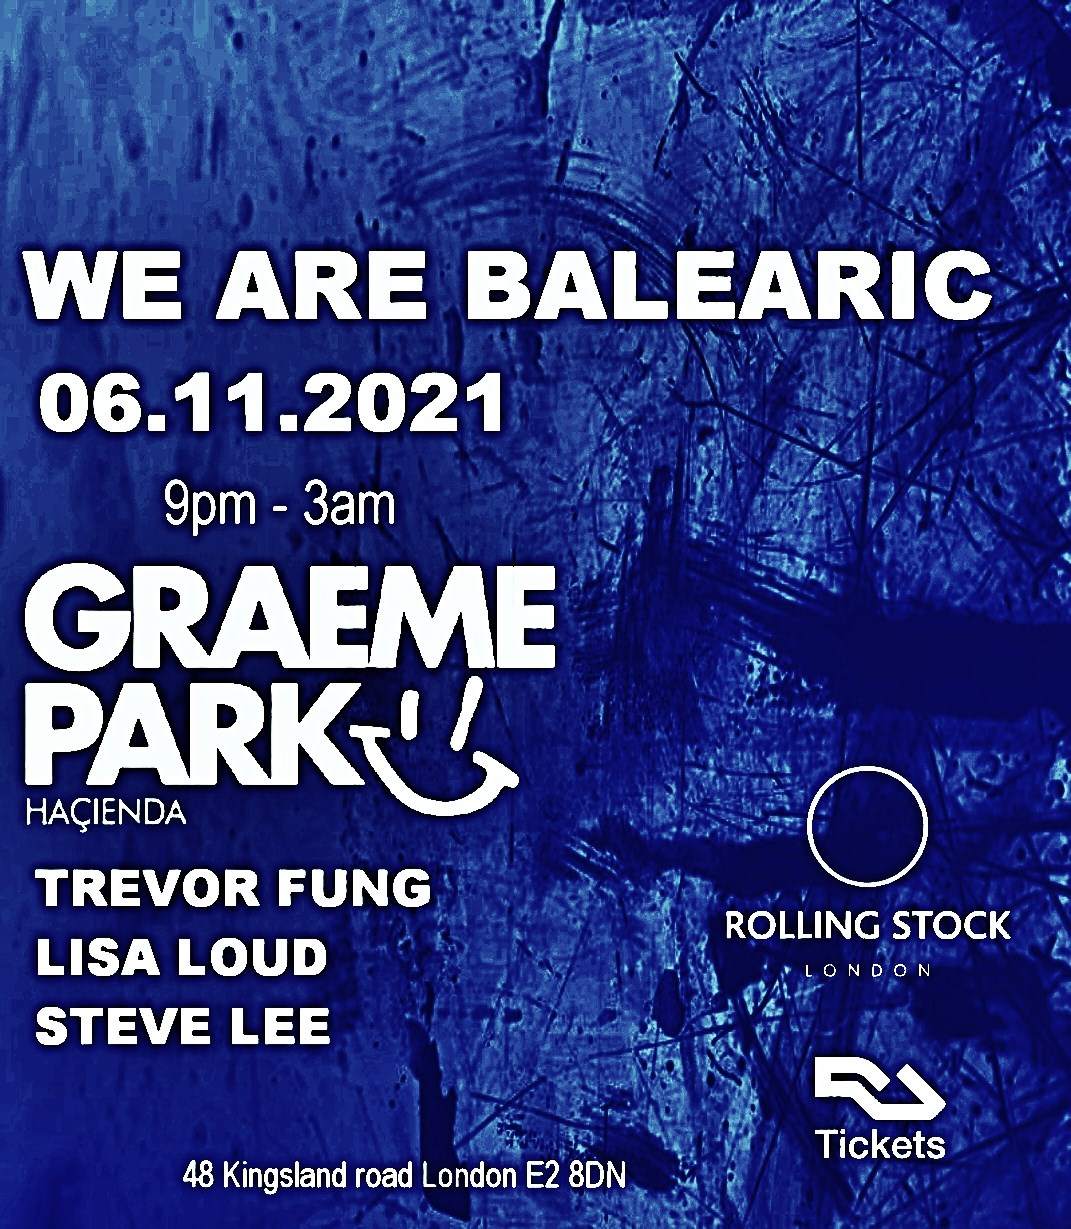 [CANCELED] We Are Balearic presents Graeme Park - フライヤー表